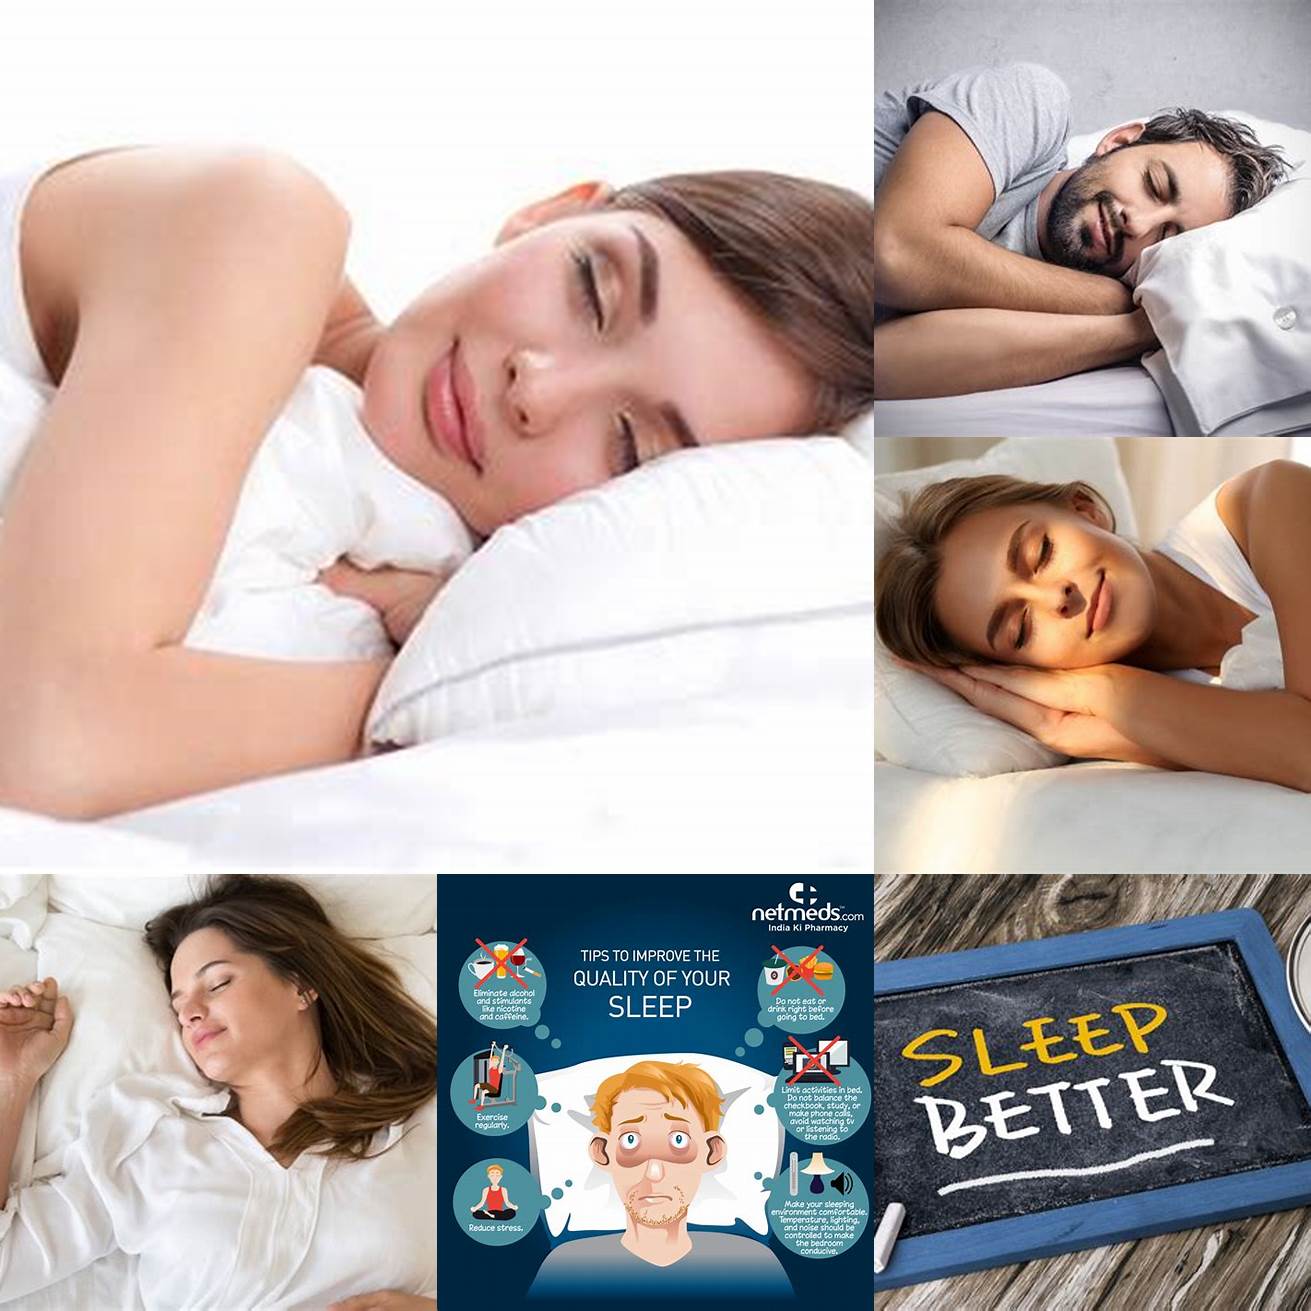 Improved Sleep High-quality bedding is more comfortable and can help regulate body temperature leading to a better nights sleep